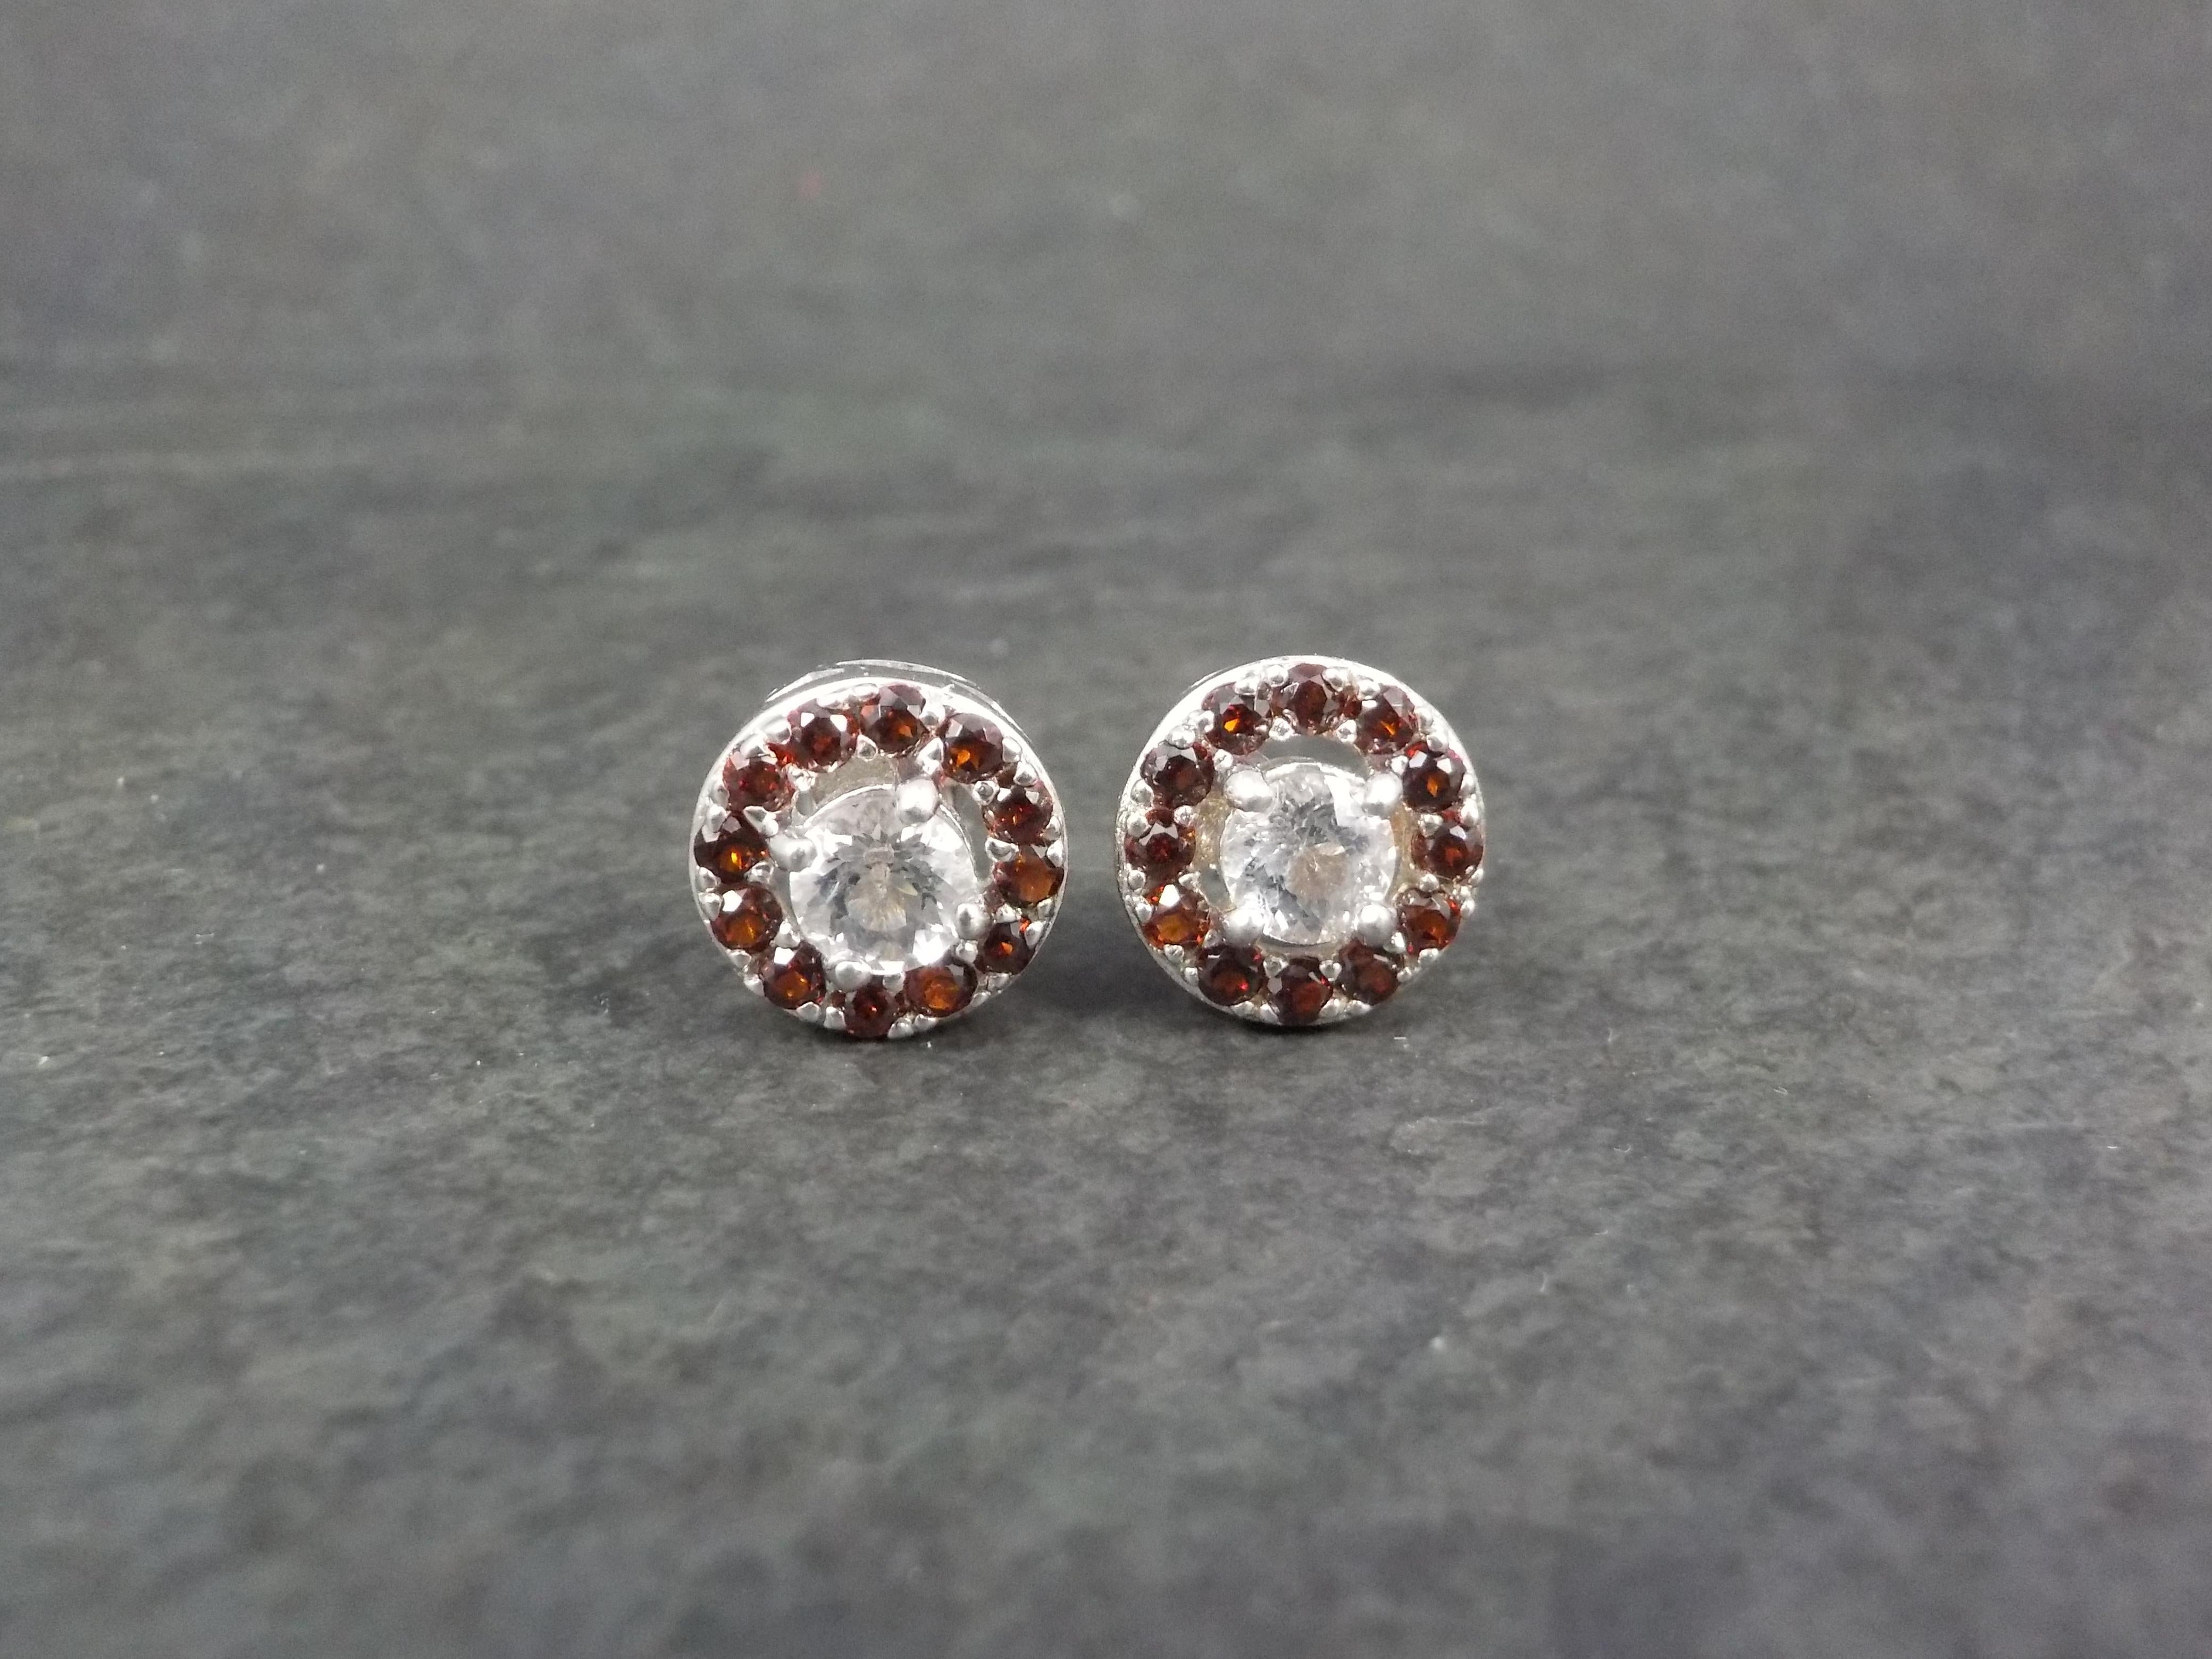 These gorgeous stud earrings are sterling silver.
They feature 5mm round, diamond cut quartz accented by a halo of garnets.
Measurements: 7/16 of an inch
Weight: 3.5 grams
Condition: New old stock